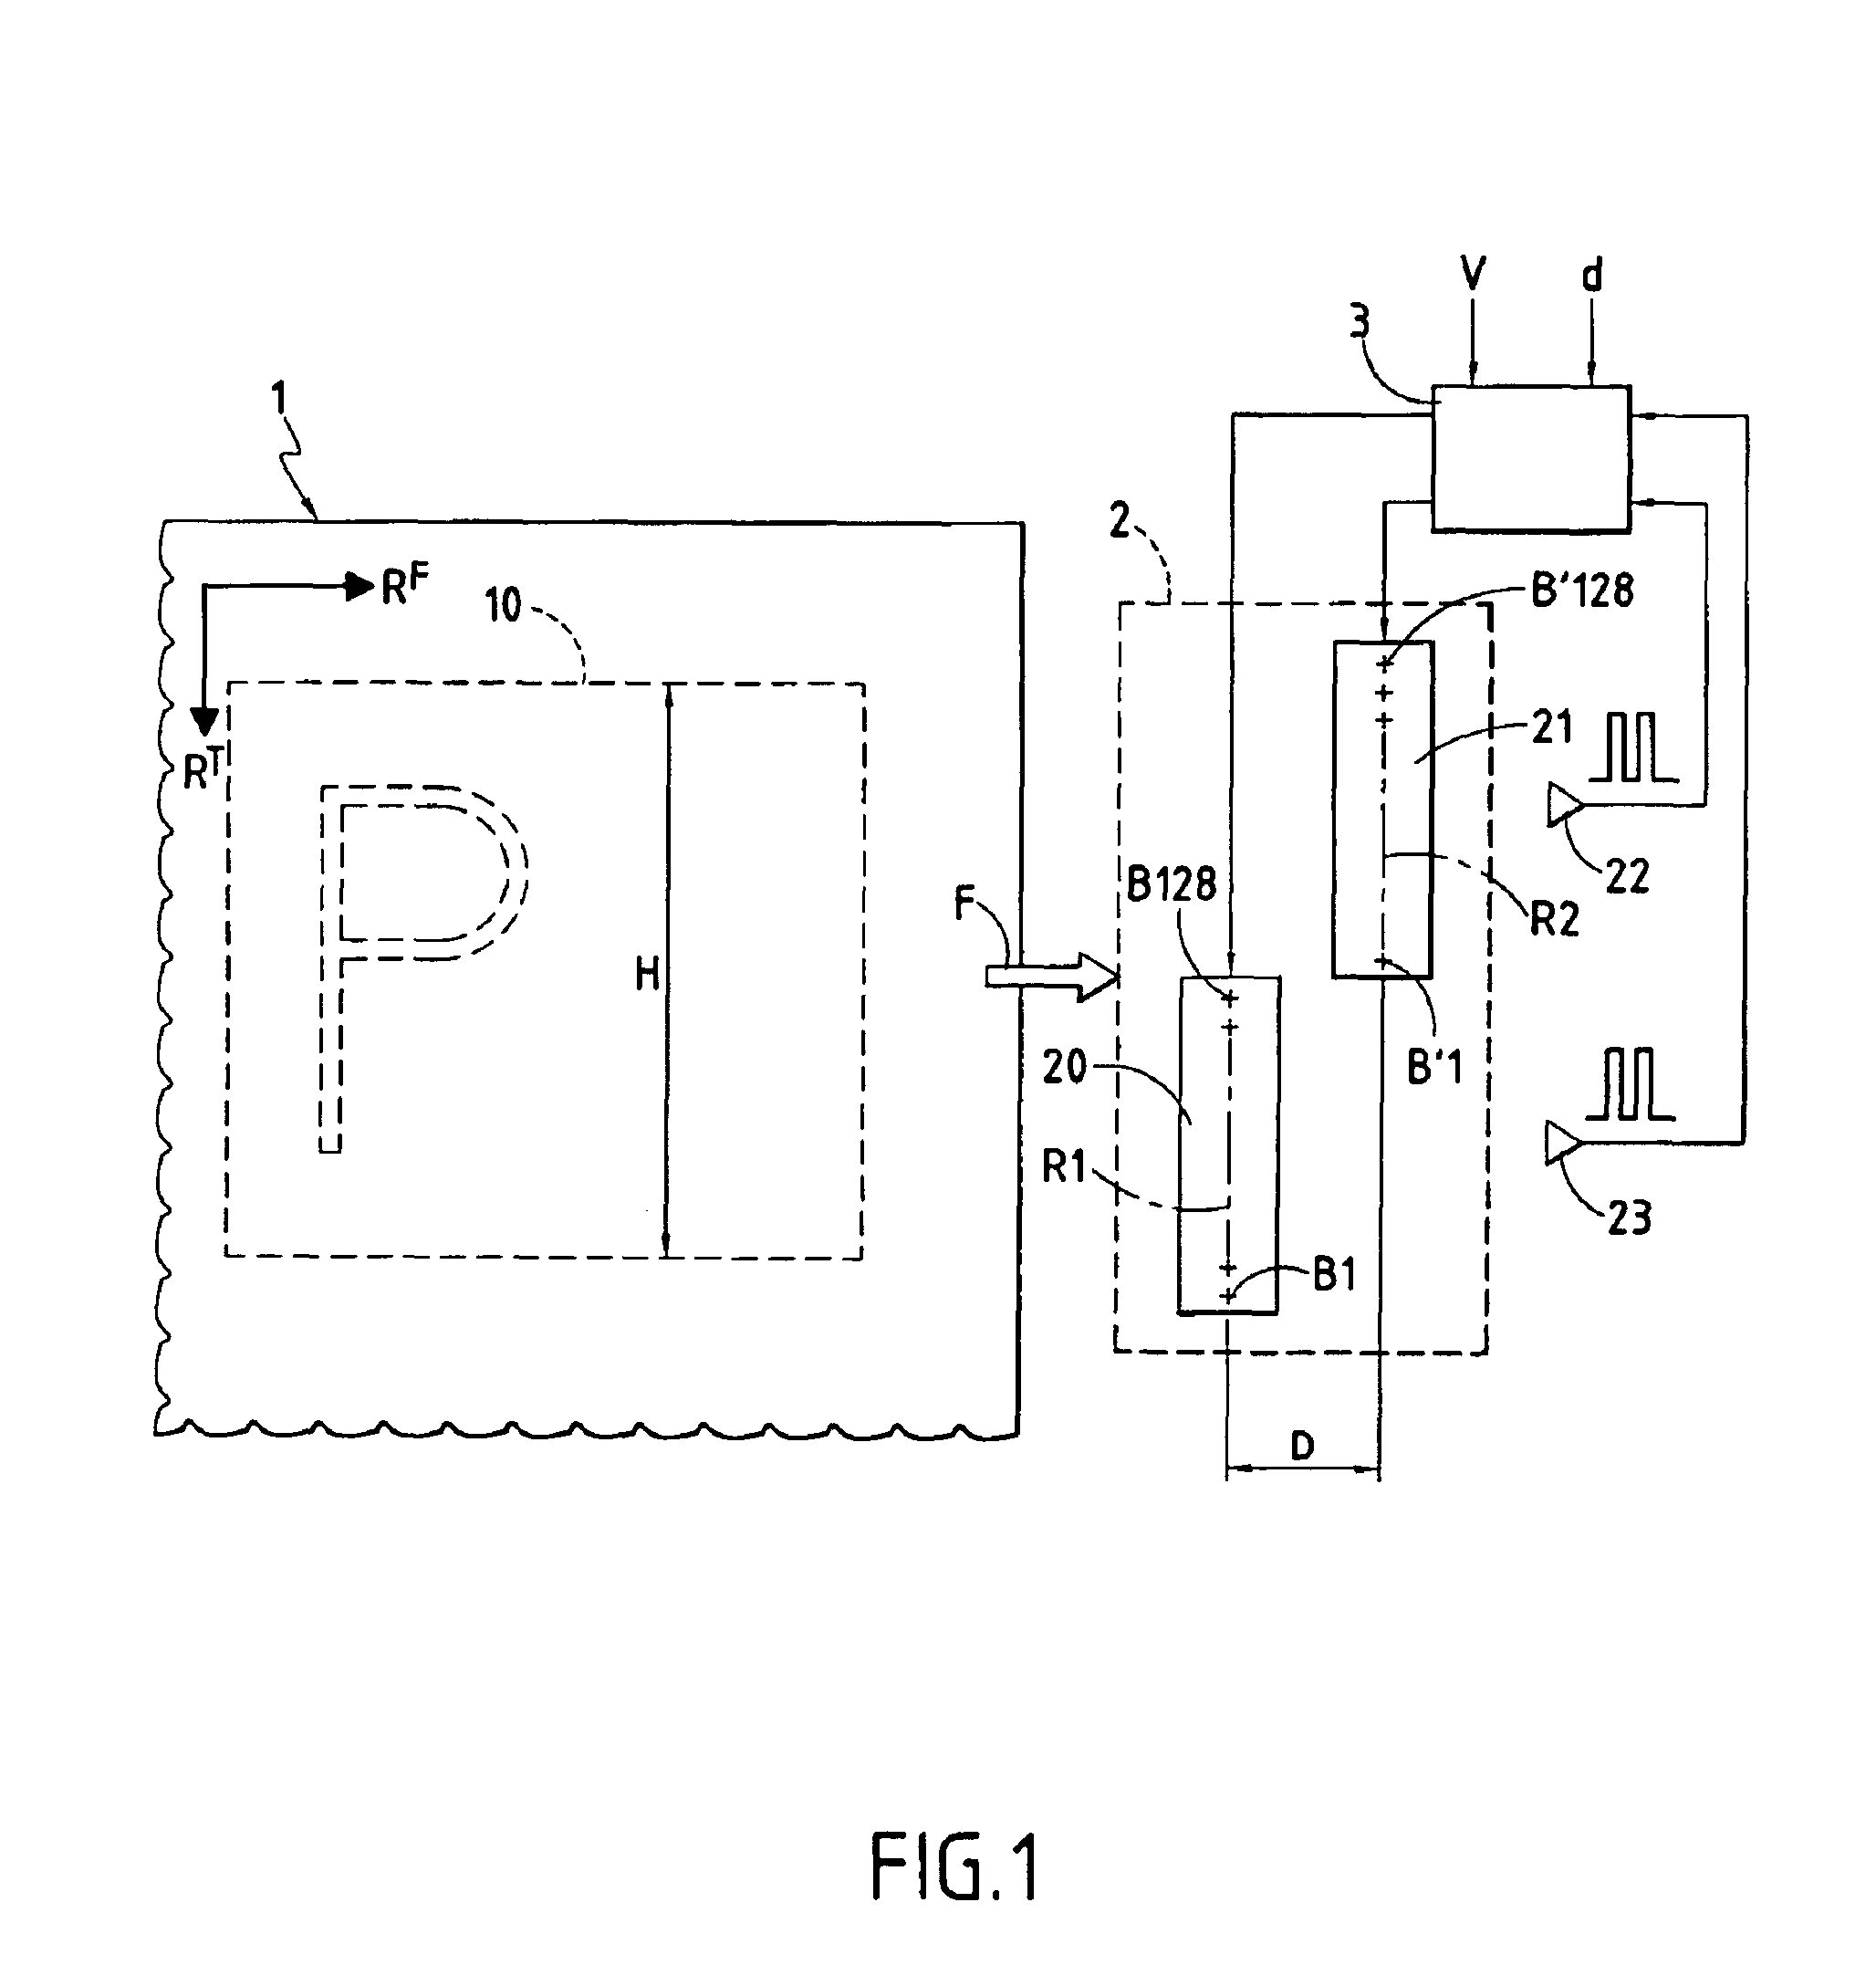 Postal printing device with facilitated reading